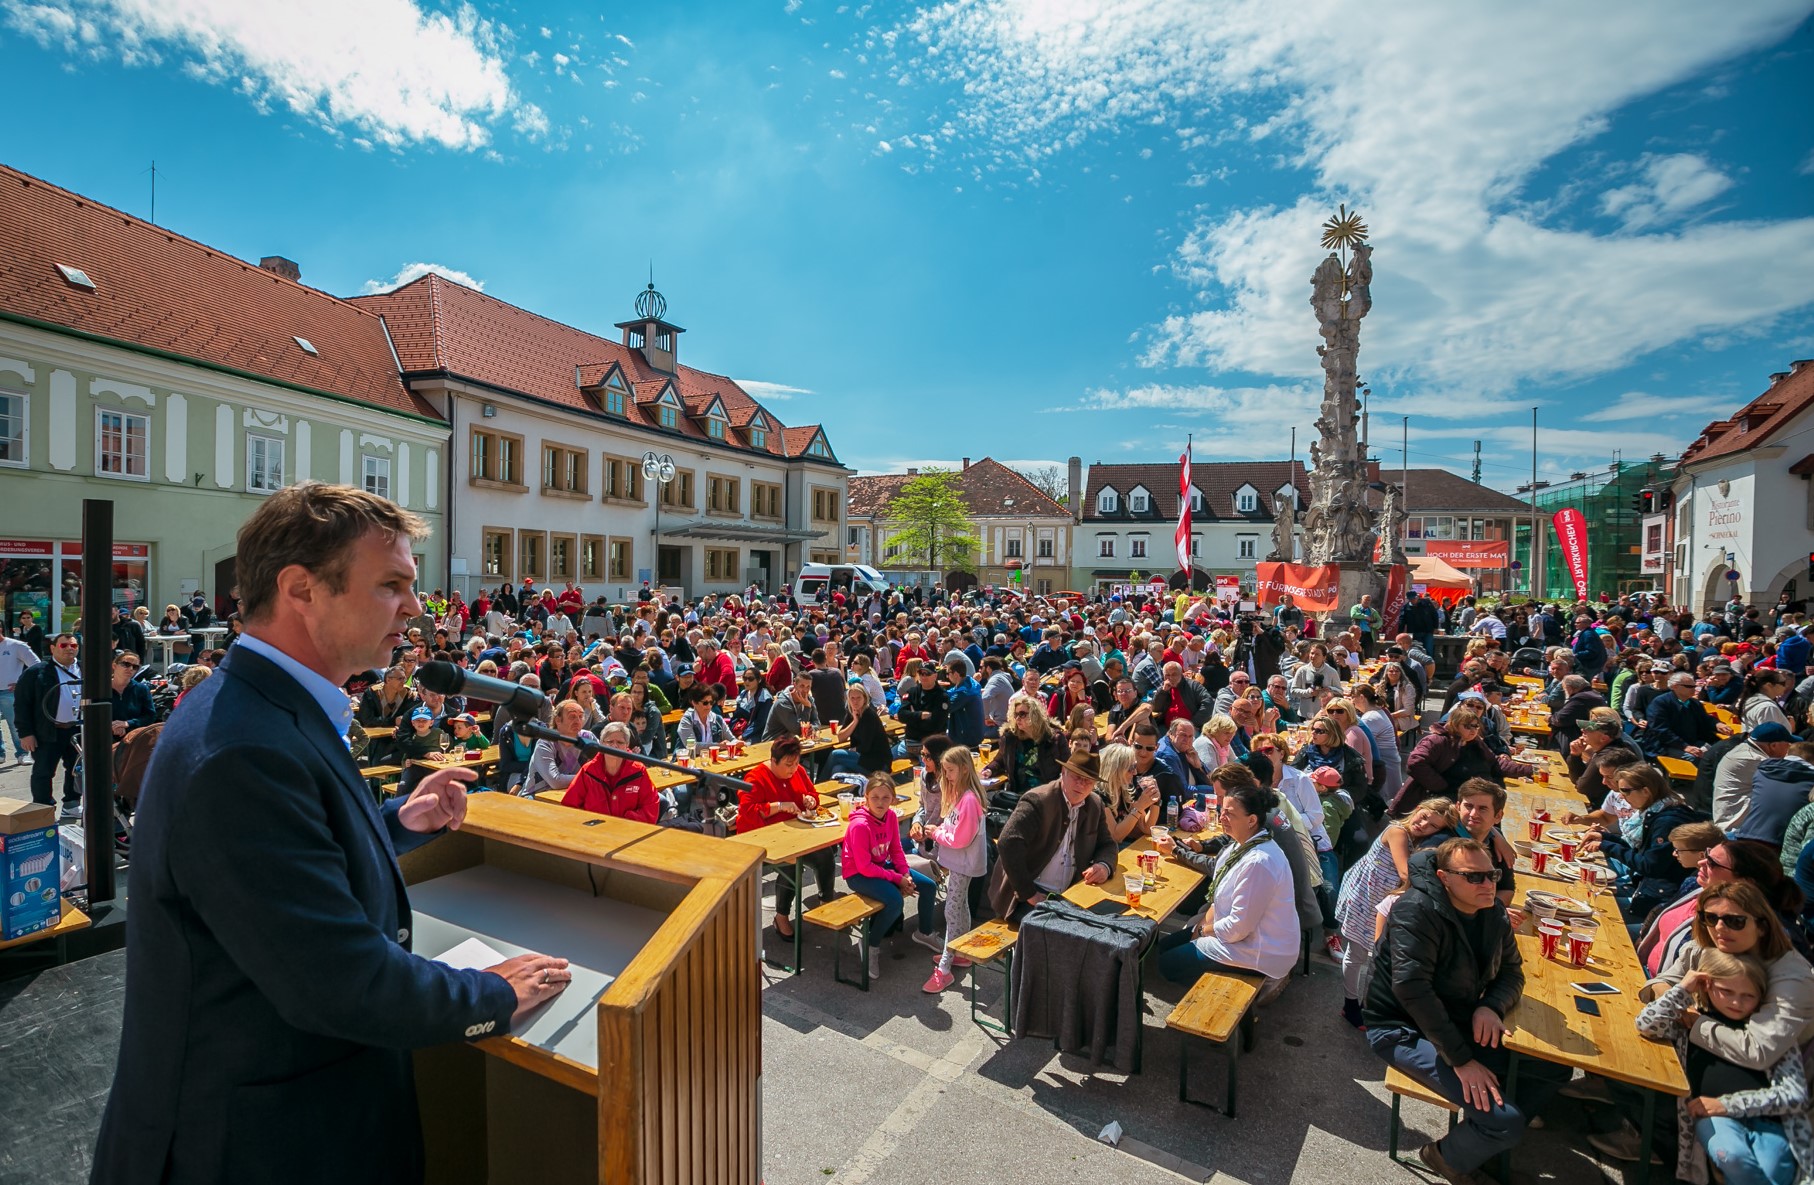 About 20,000 people live in Traiskirchen in Lower Austria, Mayor is Andreas Babler, there is also a refugee camp